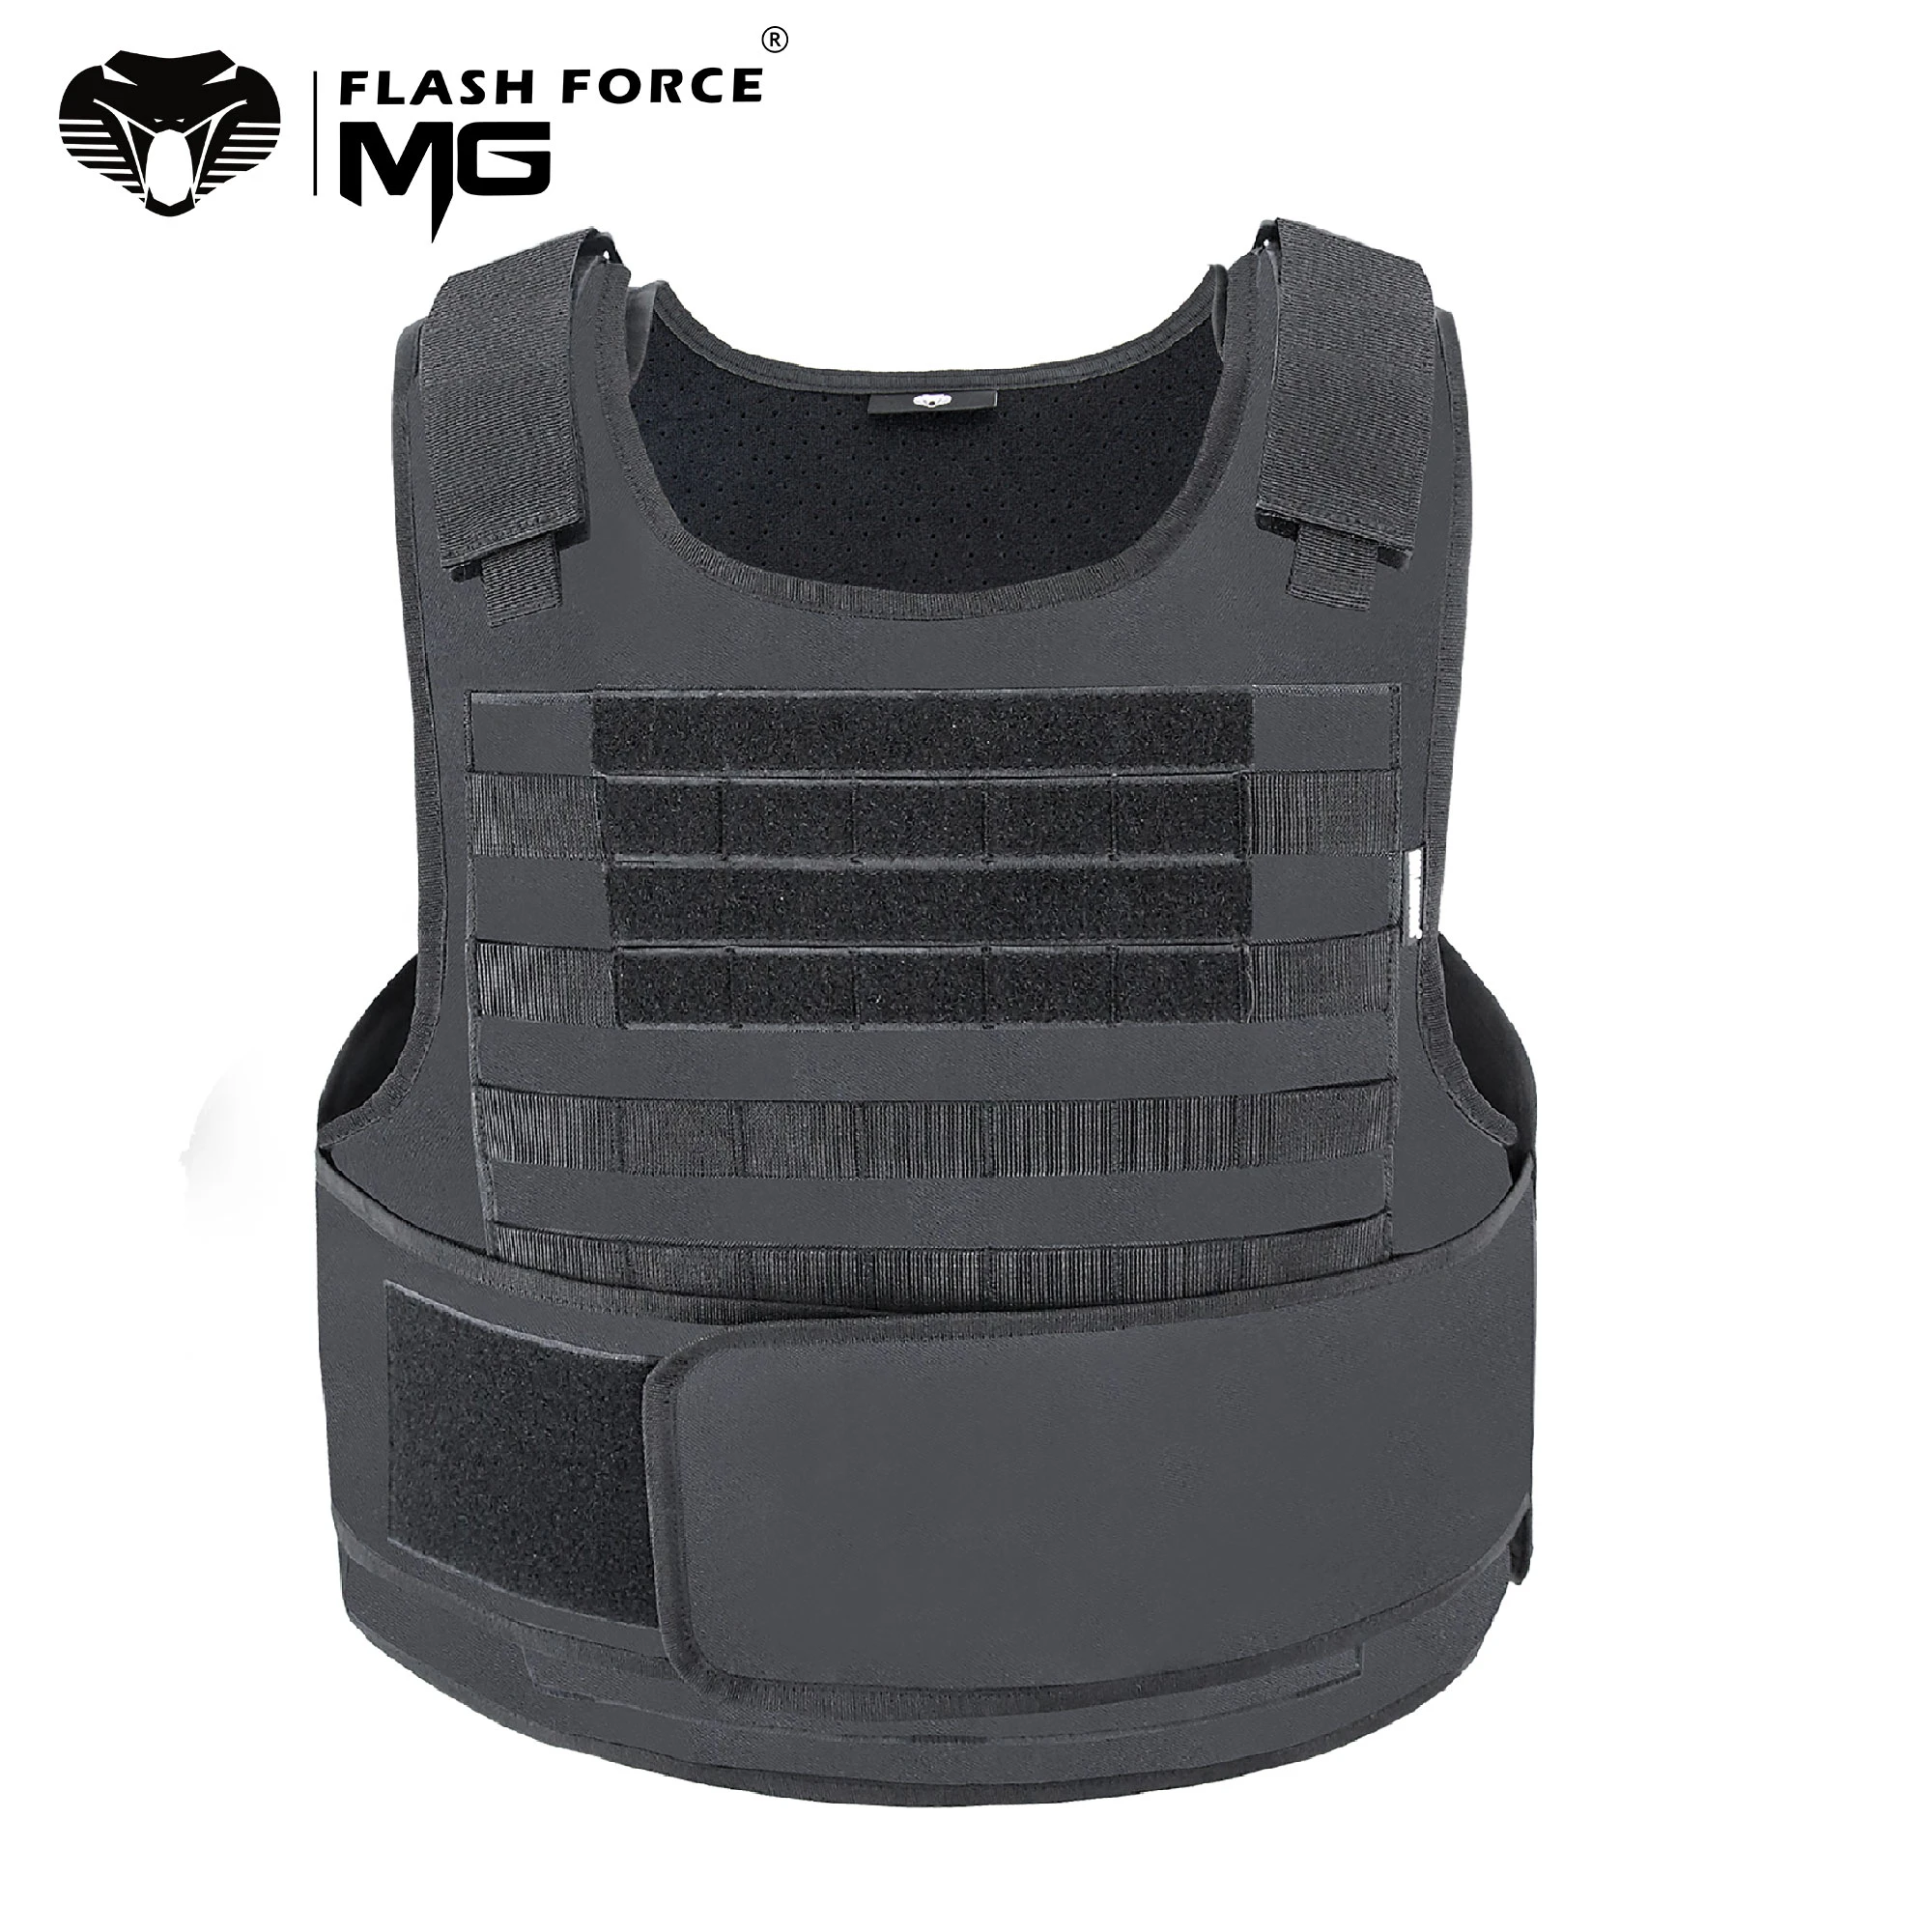 MGFLASHFORCE Airsoft Tactical Vest Plate Carrier Swat Fishing Hunting  Military Army Armor Police Molle Vest|Hunting Vests| - AliExpress